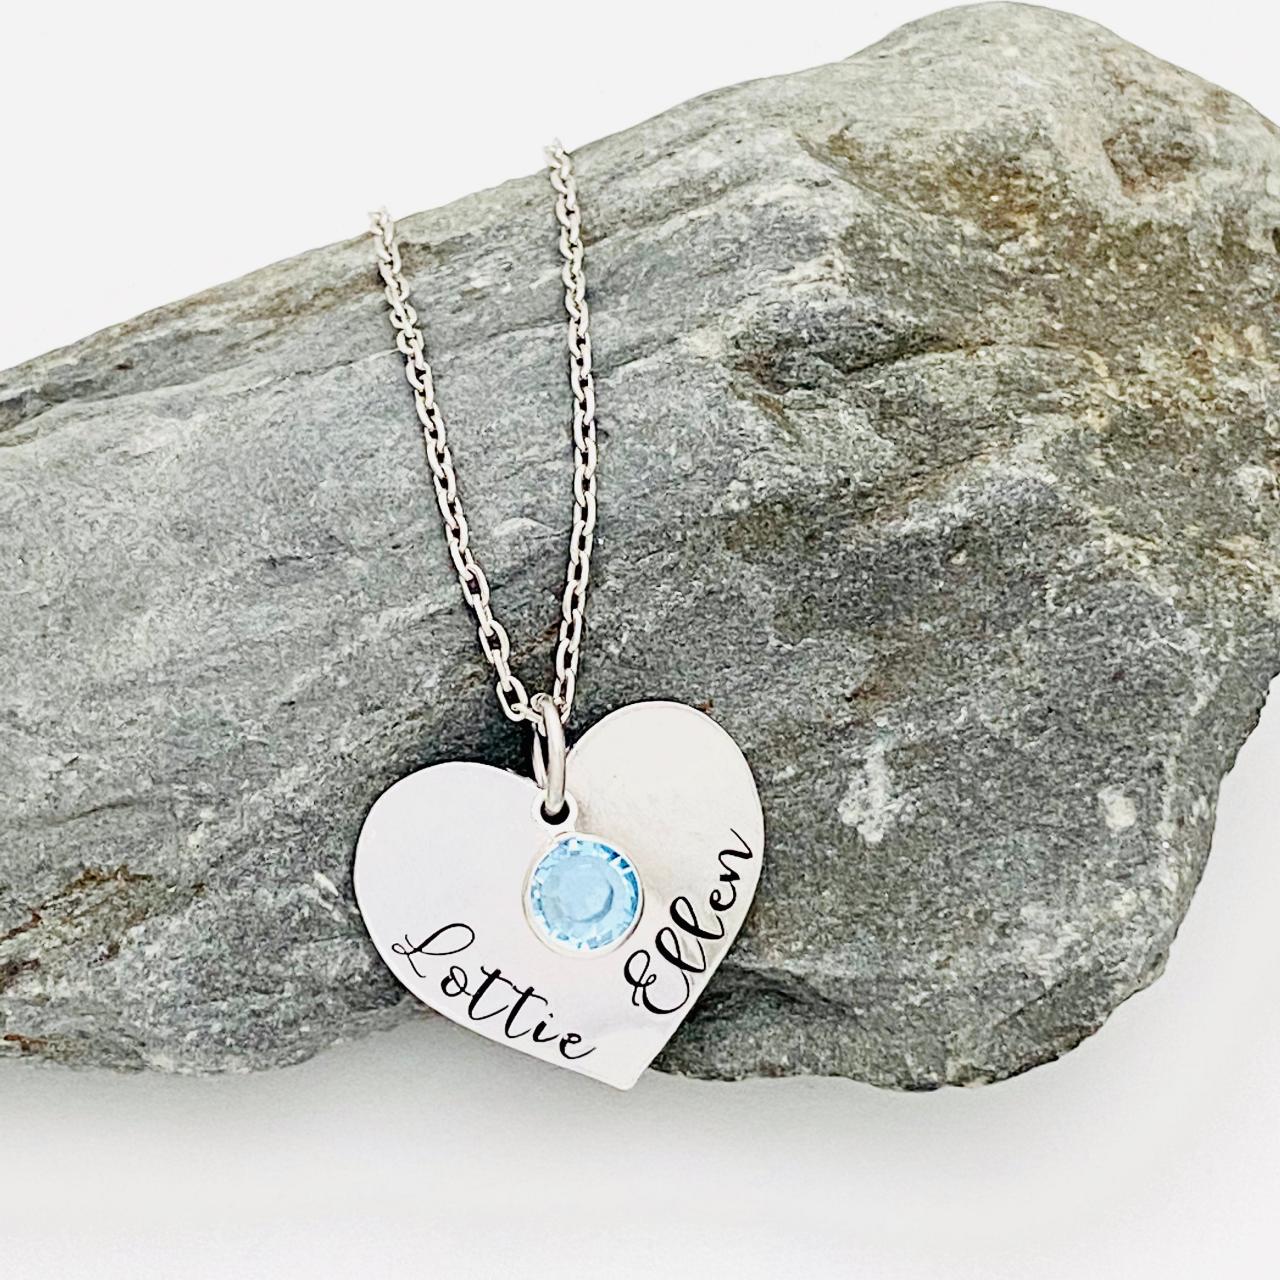 Personalised Heart Necklace, Necklace For Daughter, Birthstone Swarovski Jewellery, Hand Stamped Heart Jewellery, Name Necklace, Birthday..